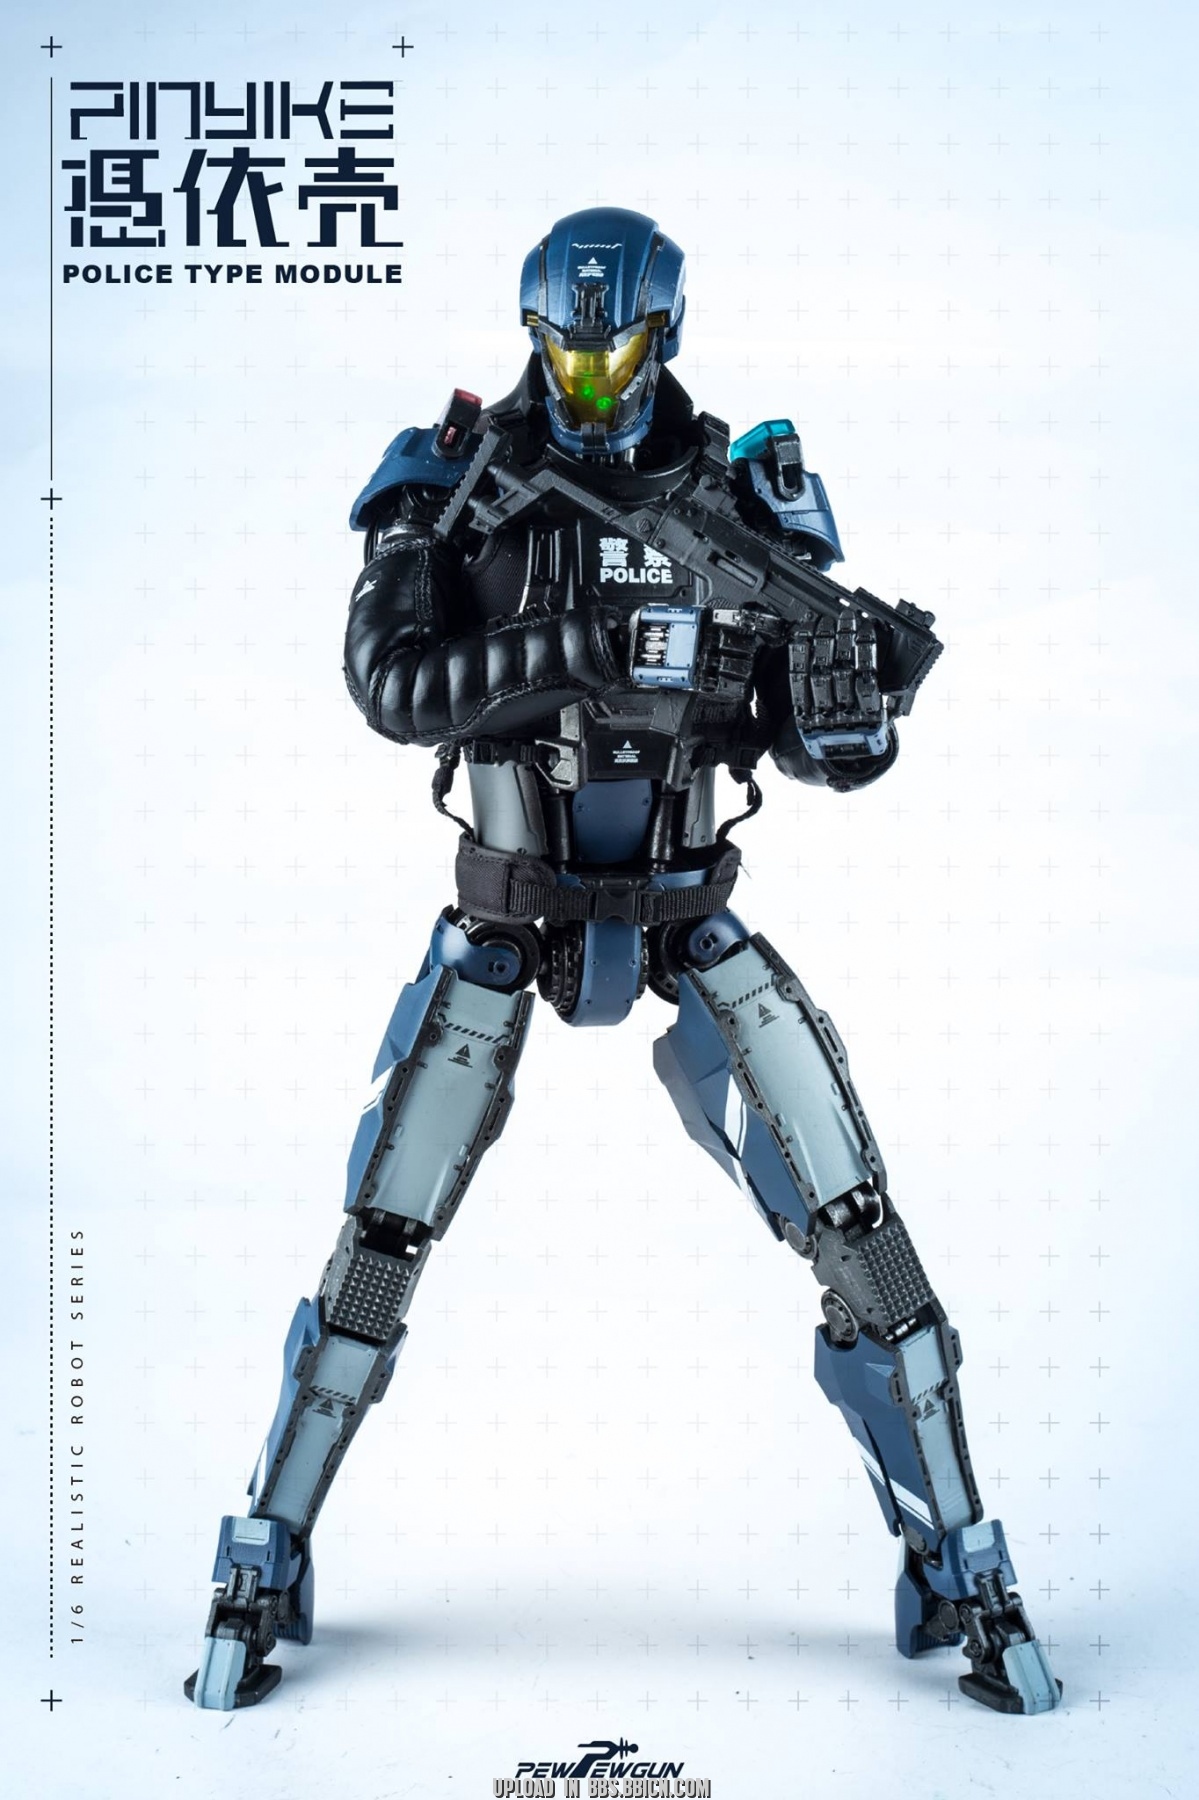 NEW PRODUCT: PewPew Gun - New figures up for Pre-order 15225310